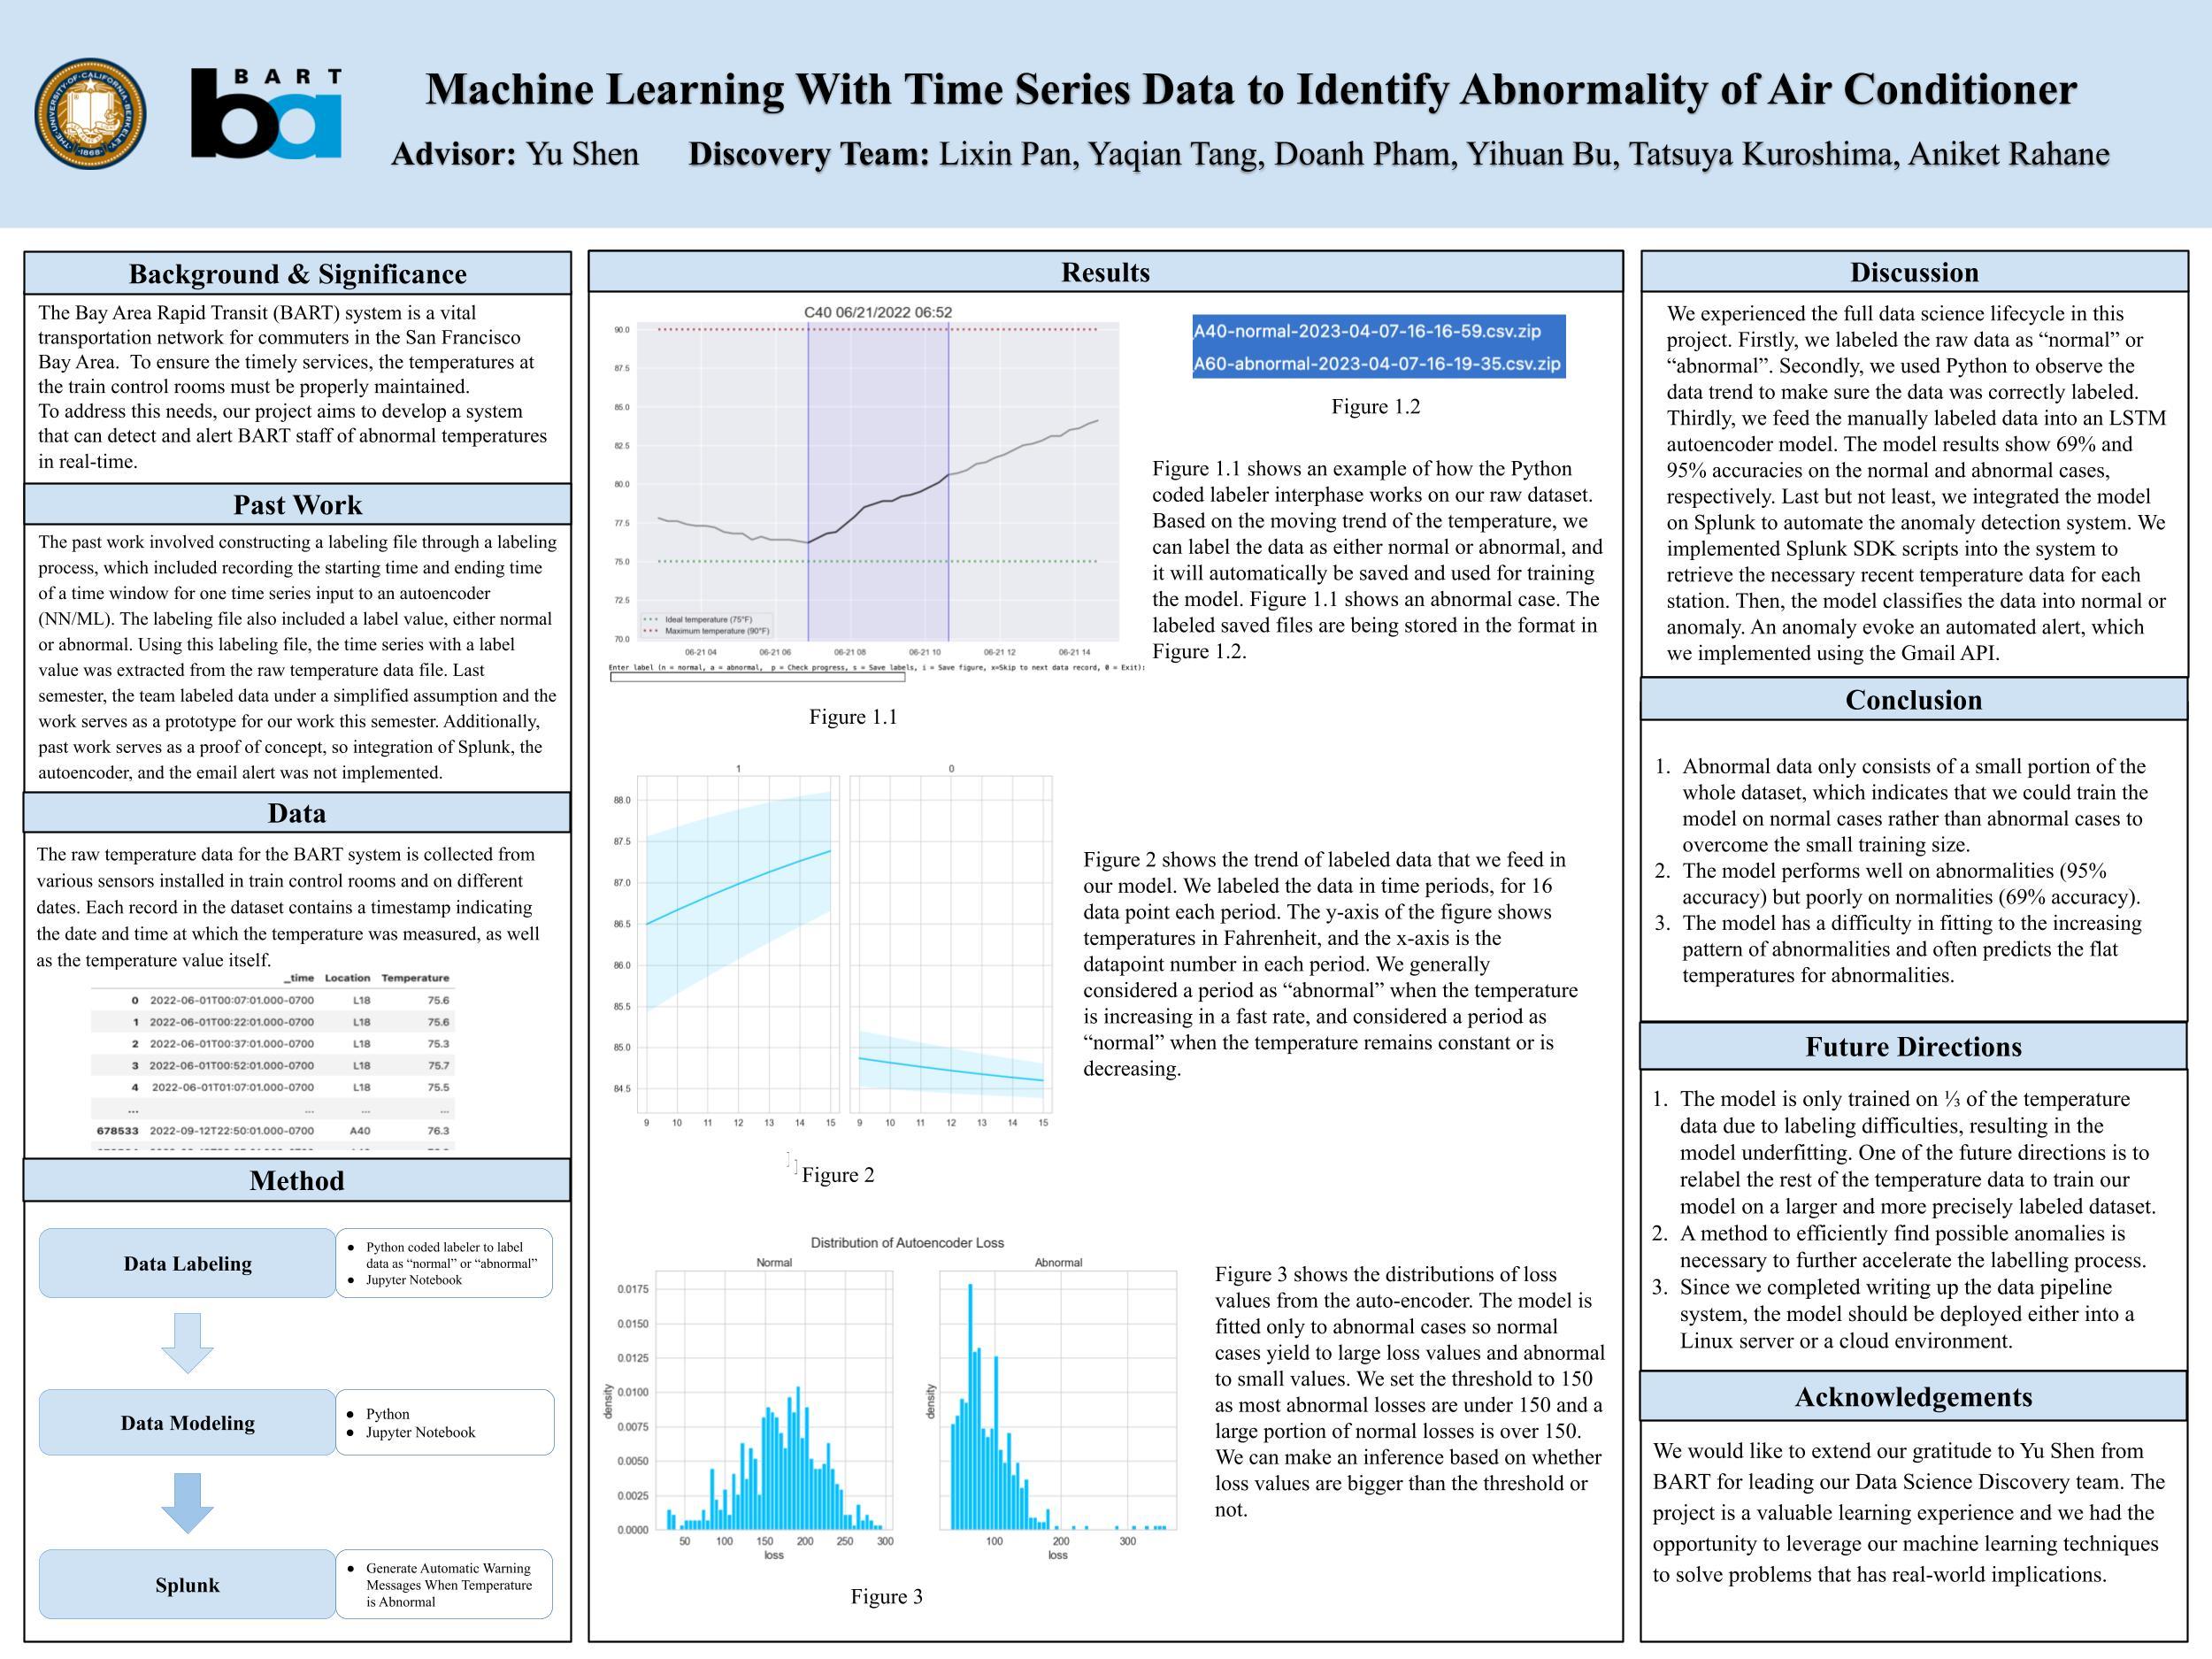 Machine Learning With Time Series Data to Identify Abnormality of Air Conditioner - Spring 2023 Discovery Project